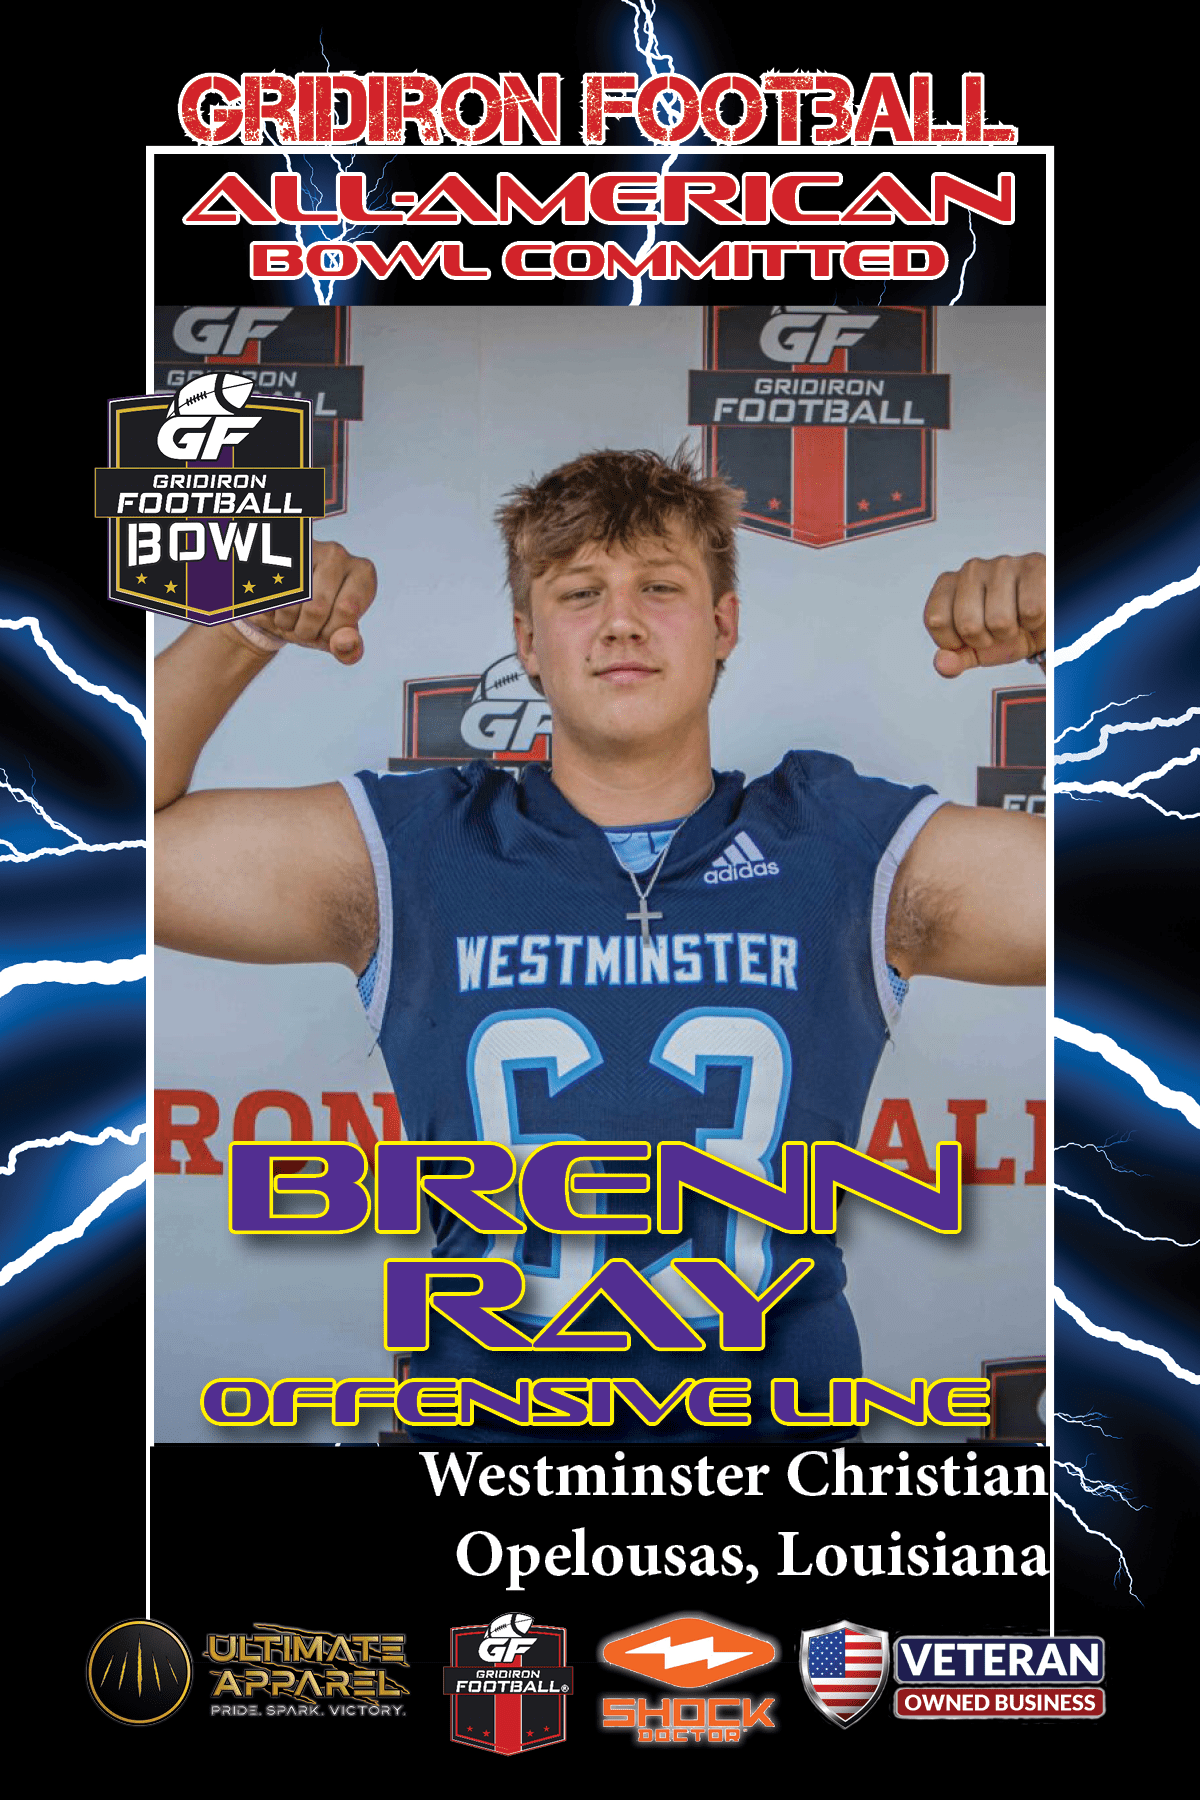 BREAKING NEWS: Westminister Christian Academy (Opelousas) OL Brenn Ray commits to  Gridiron Football All-American Bowl